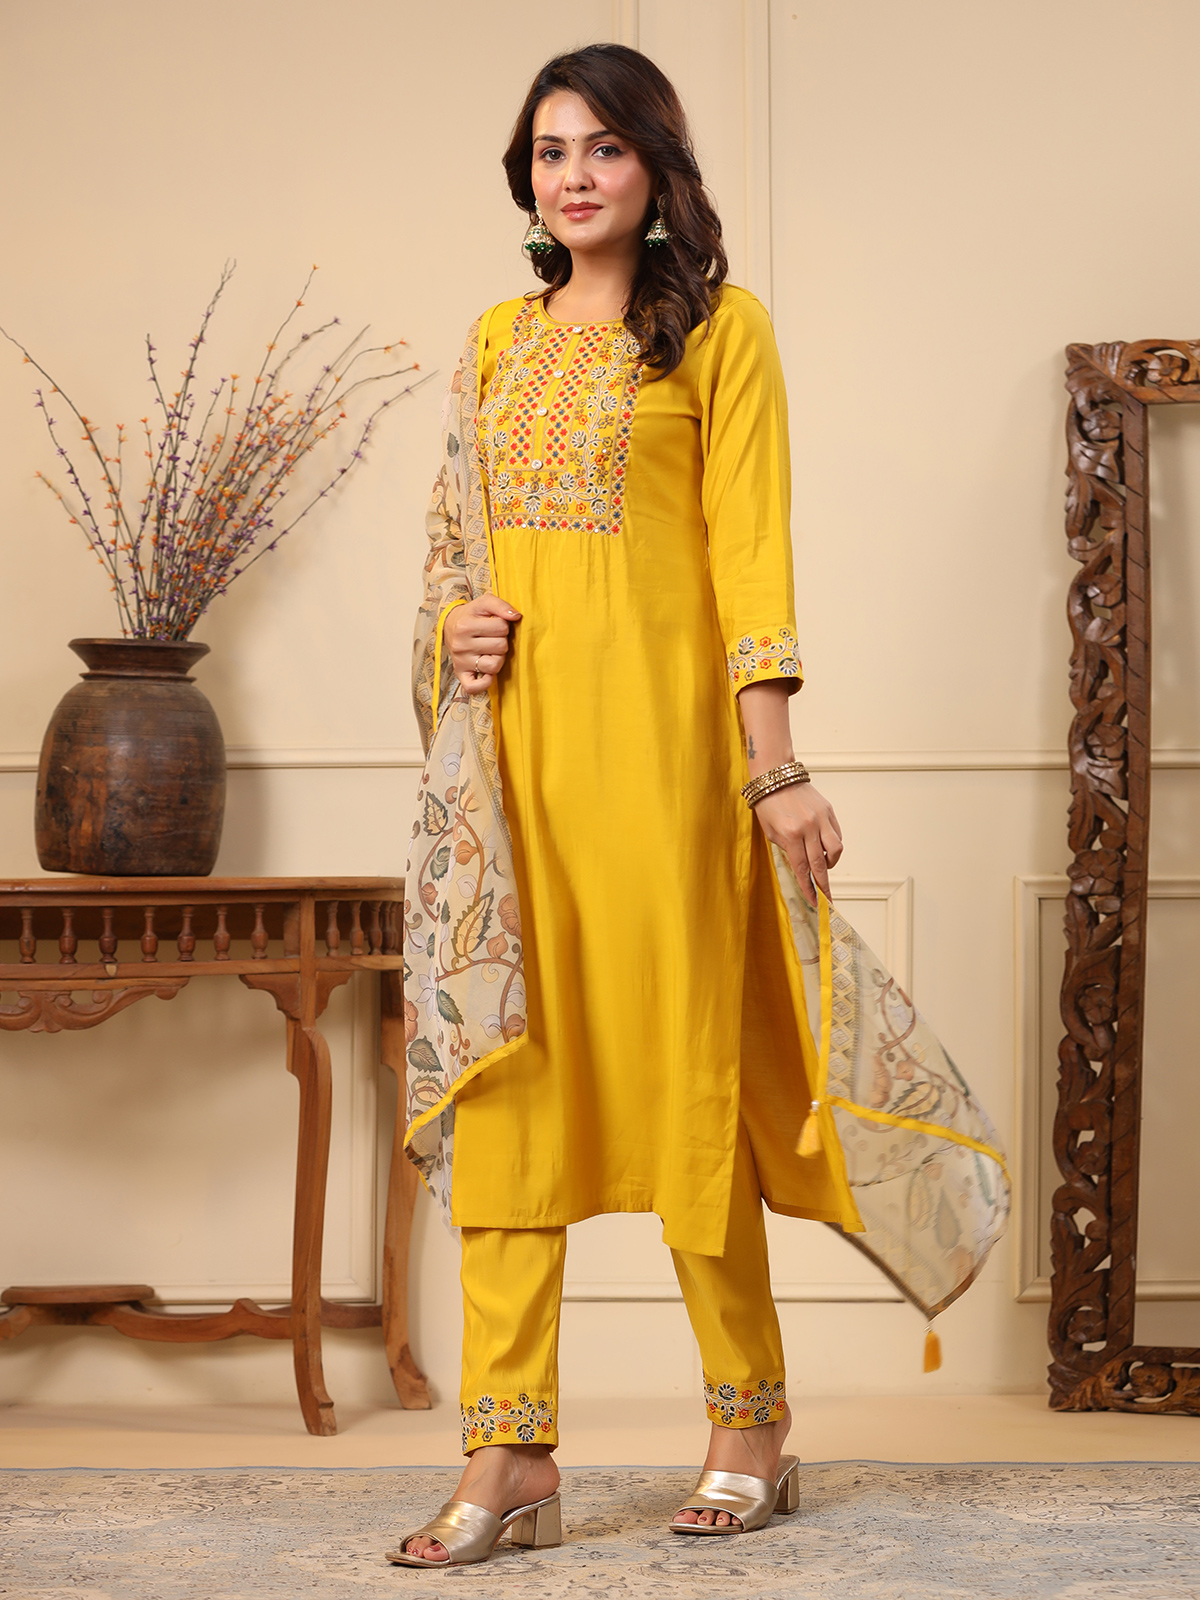 fcity.in - Embroidered Cotton Yellow Kuti Zigzag Printed Kurti For Women On